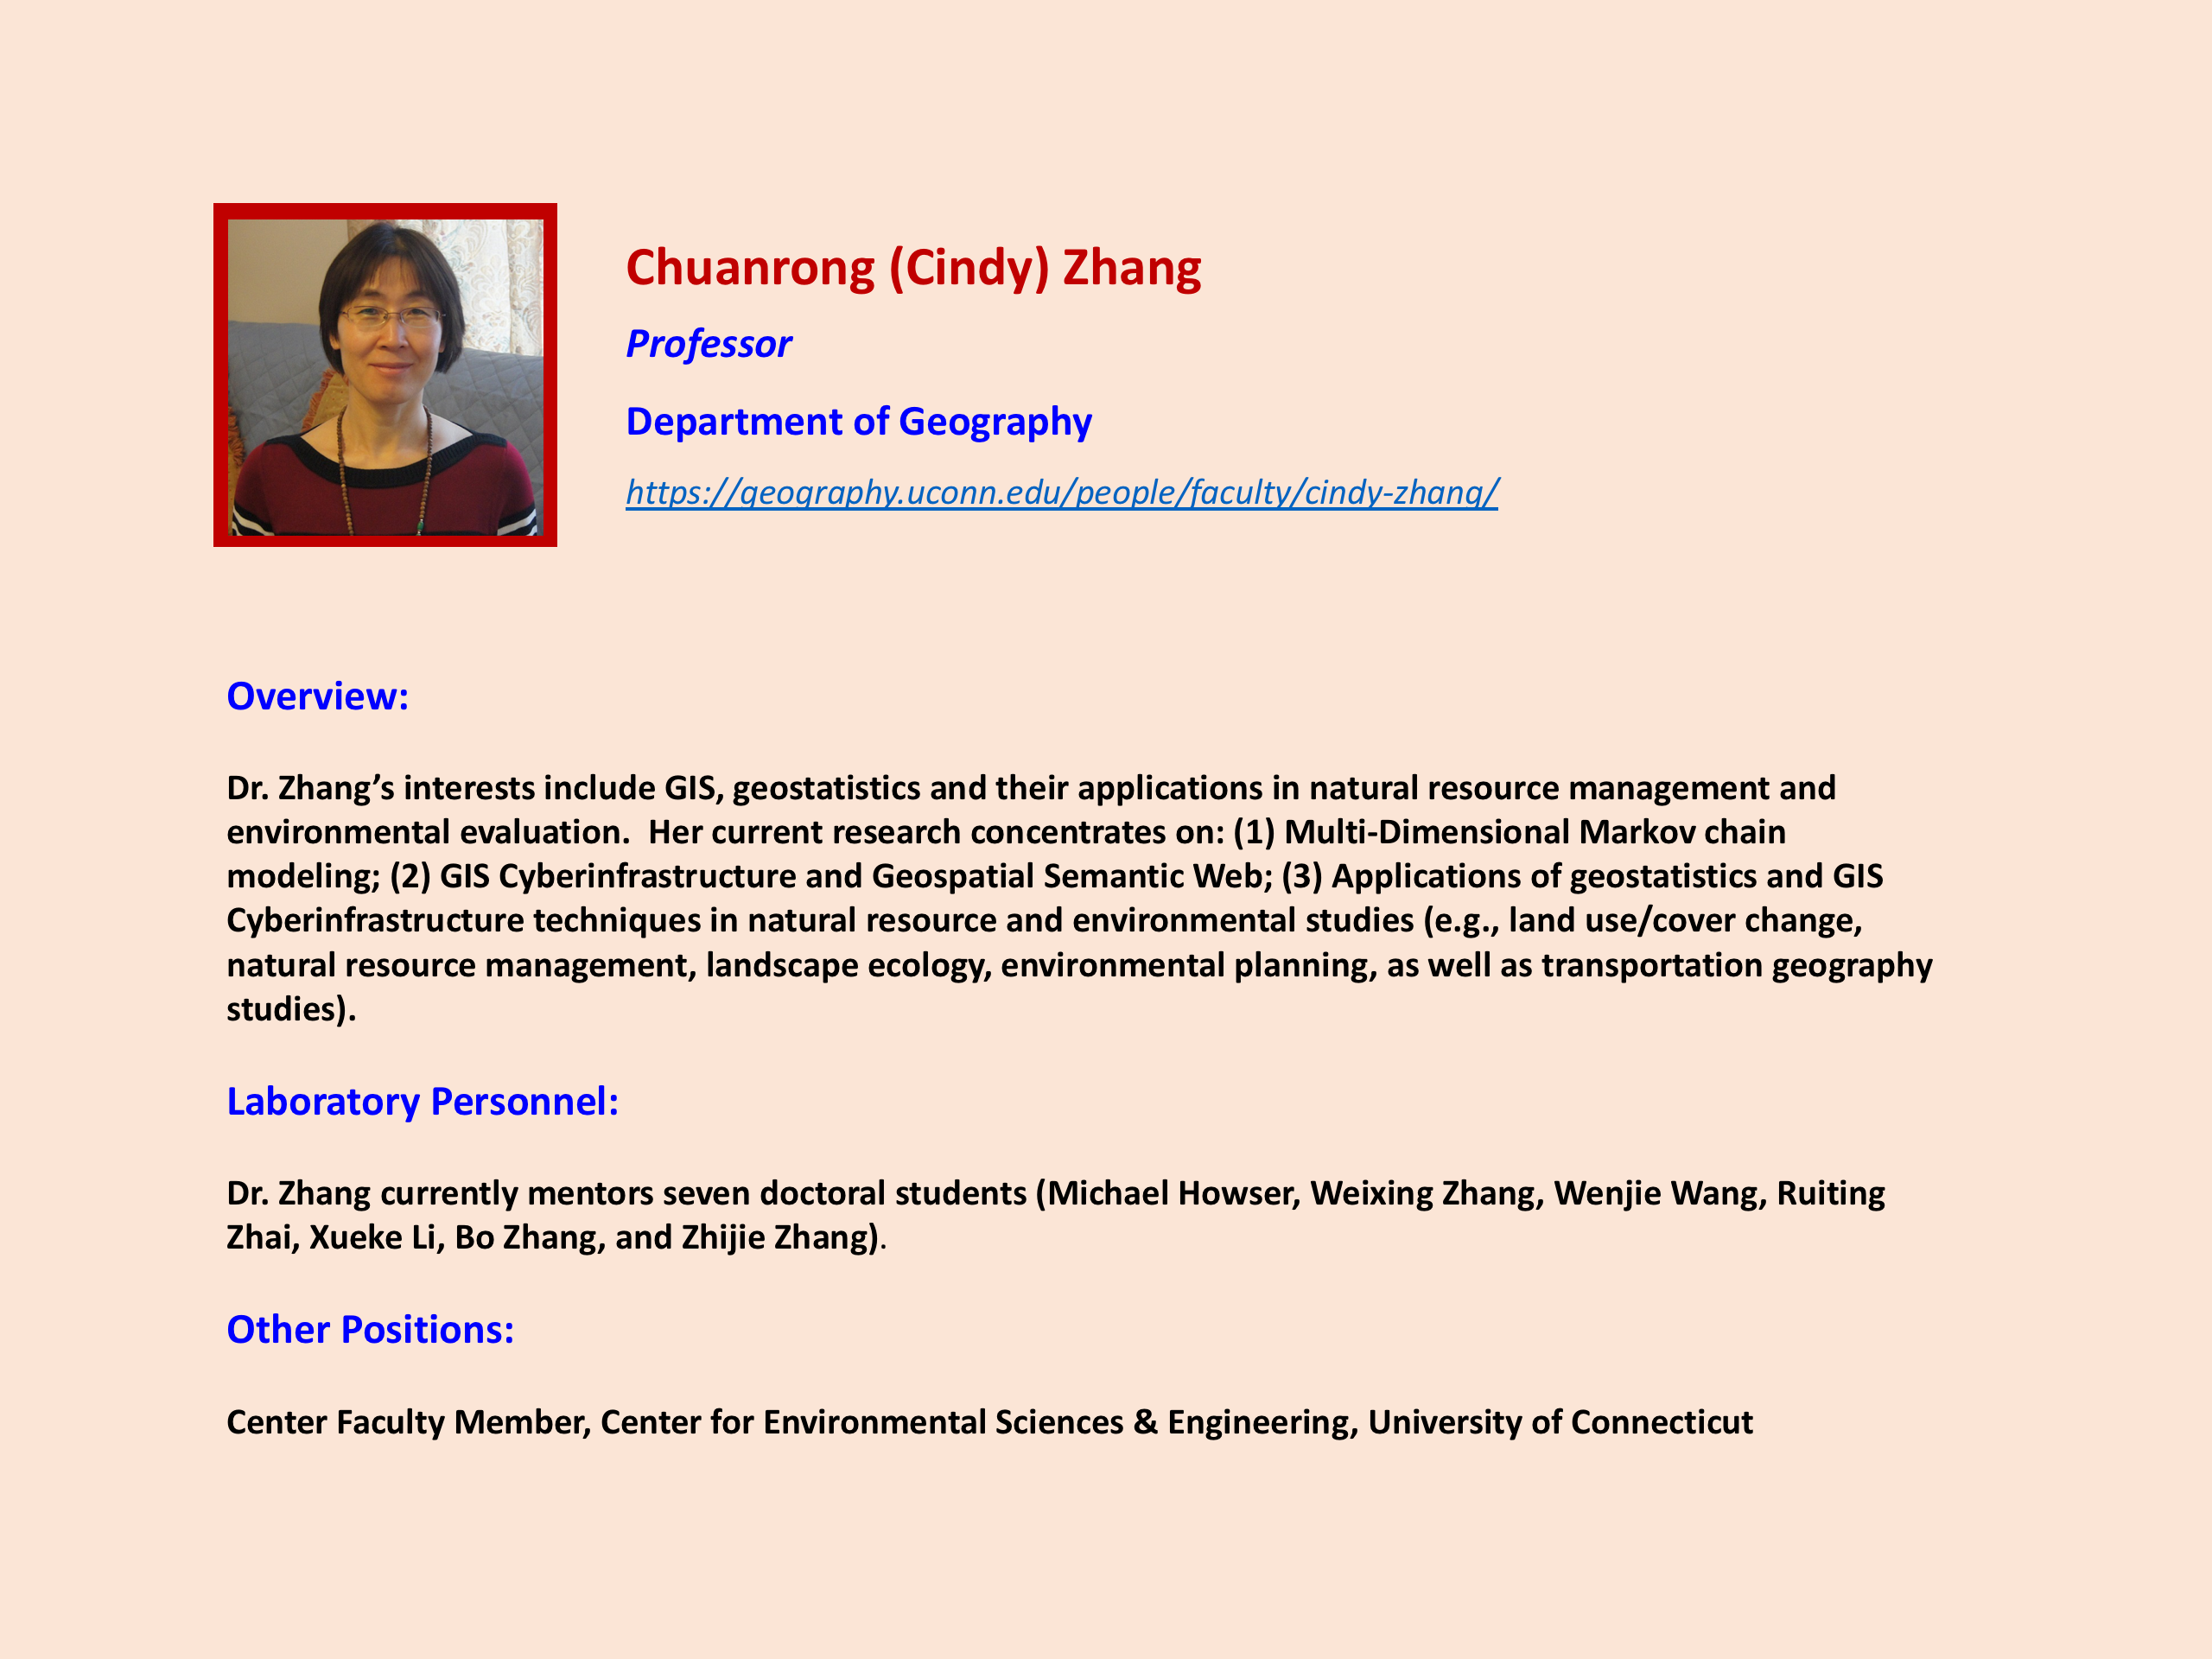 Focus on Faculty Chuanrong(Cindy) Zhang